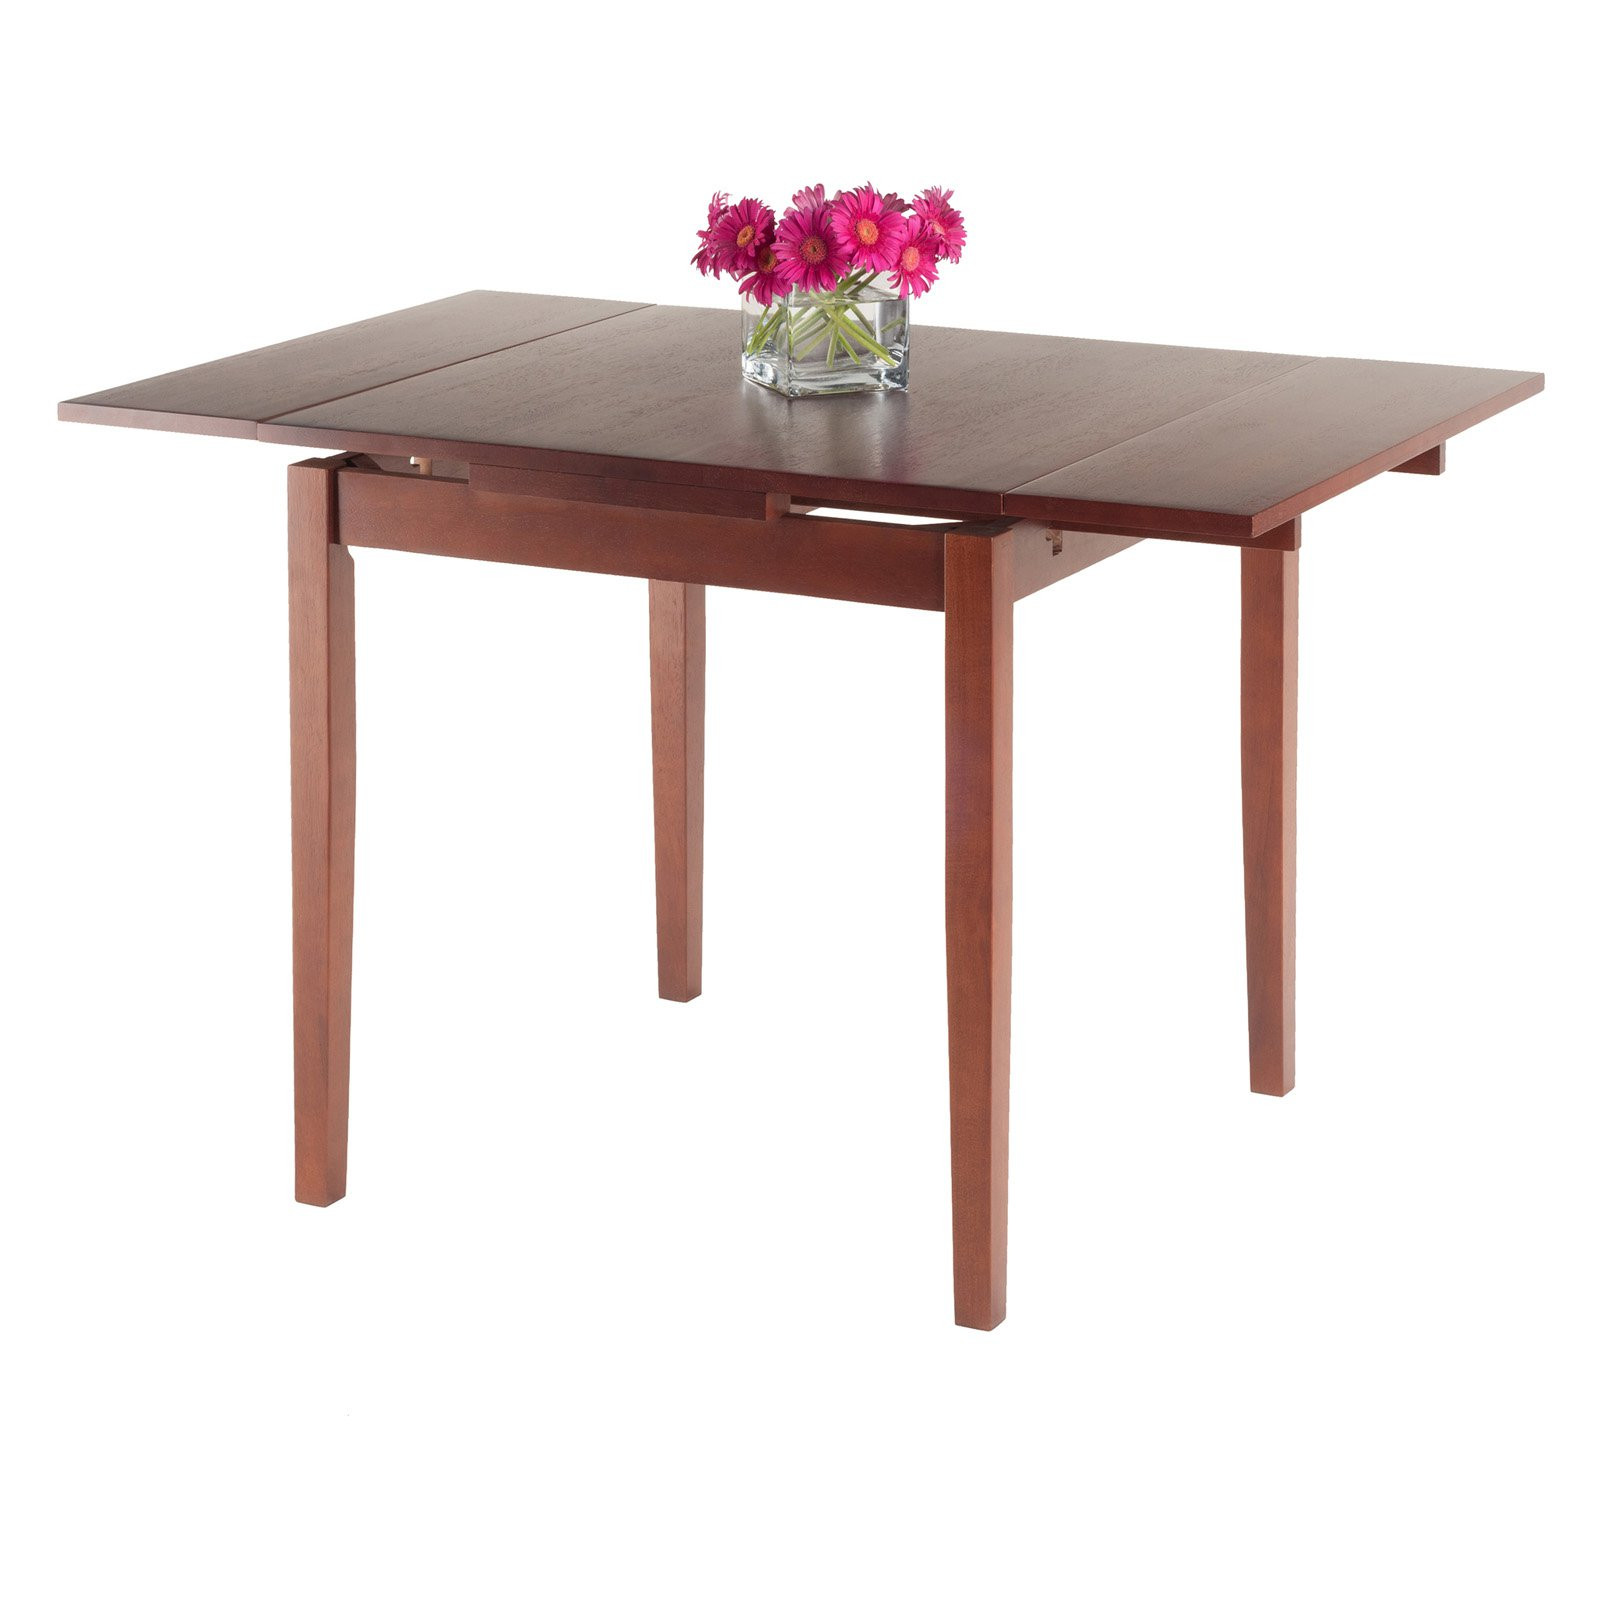 Small Wood Kitchen Table
 pact Extension Dining Table Small Wood Kitchen Folding